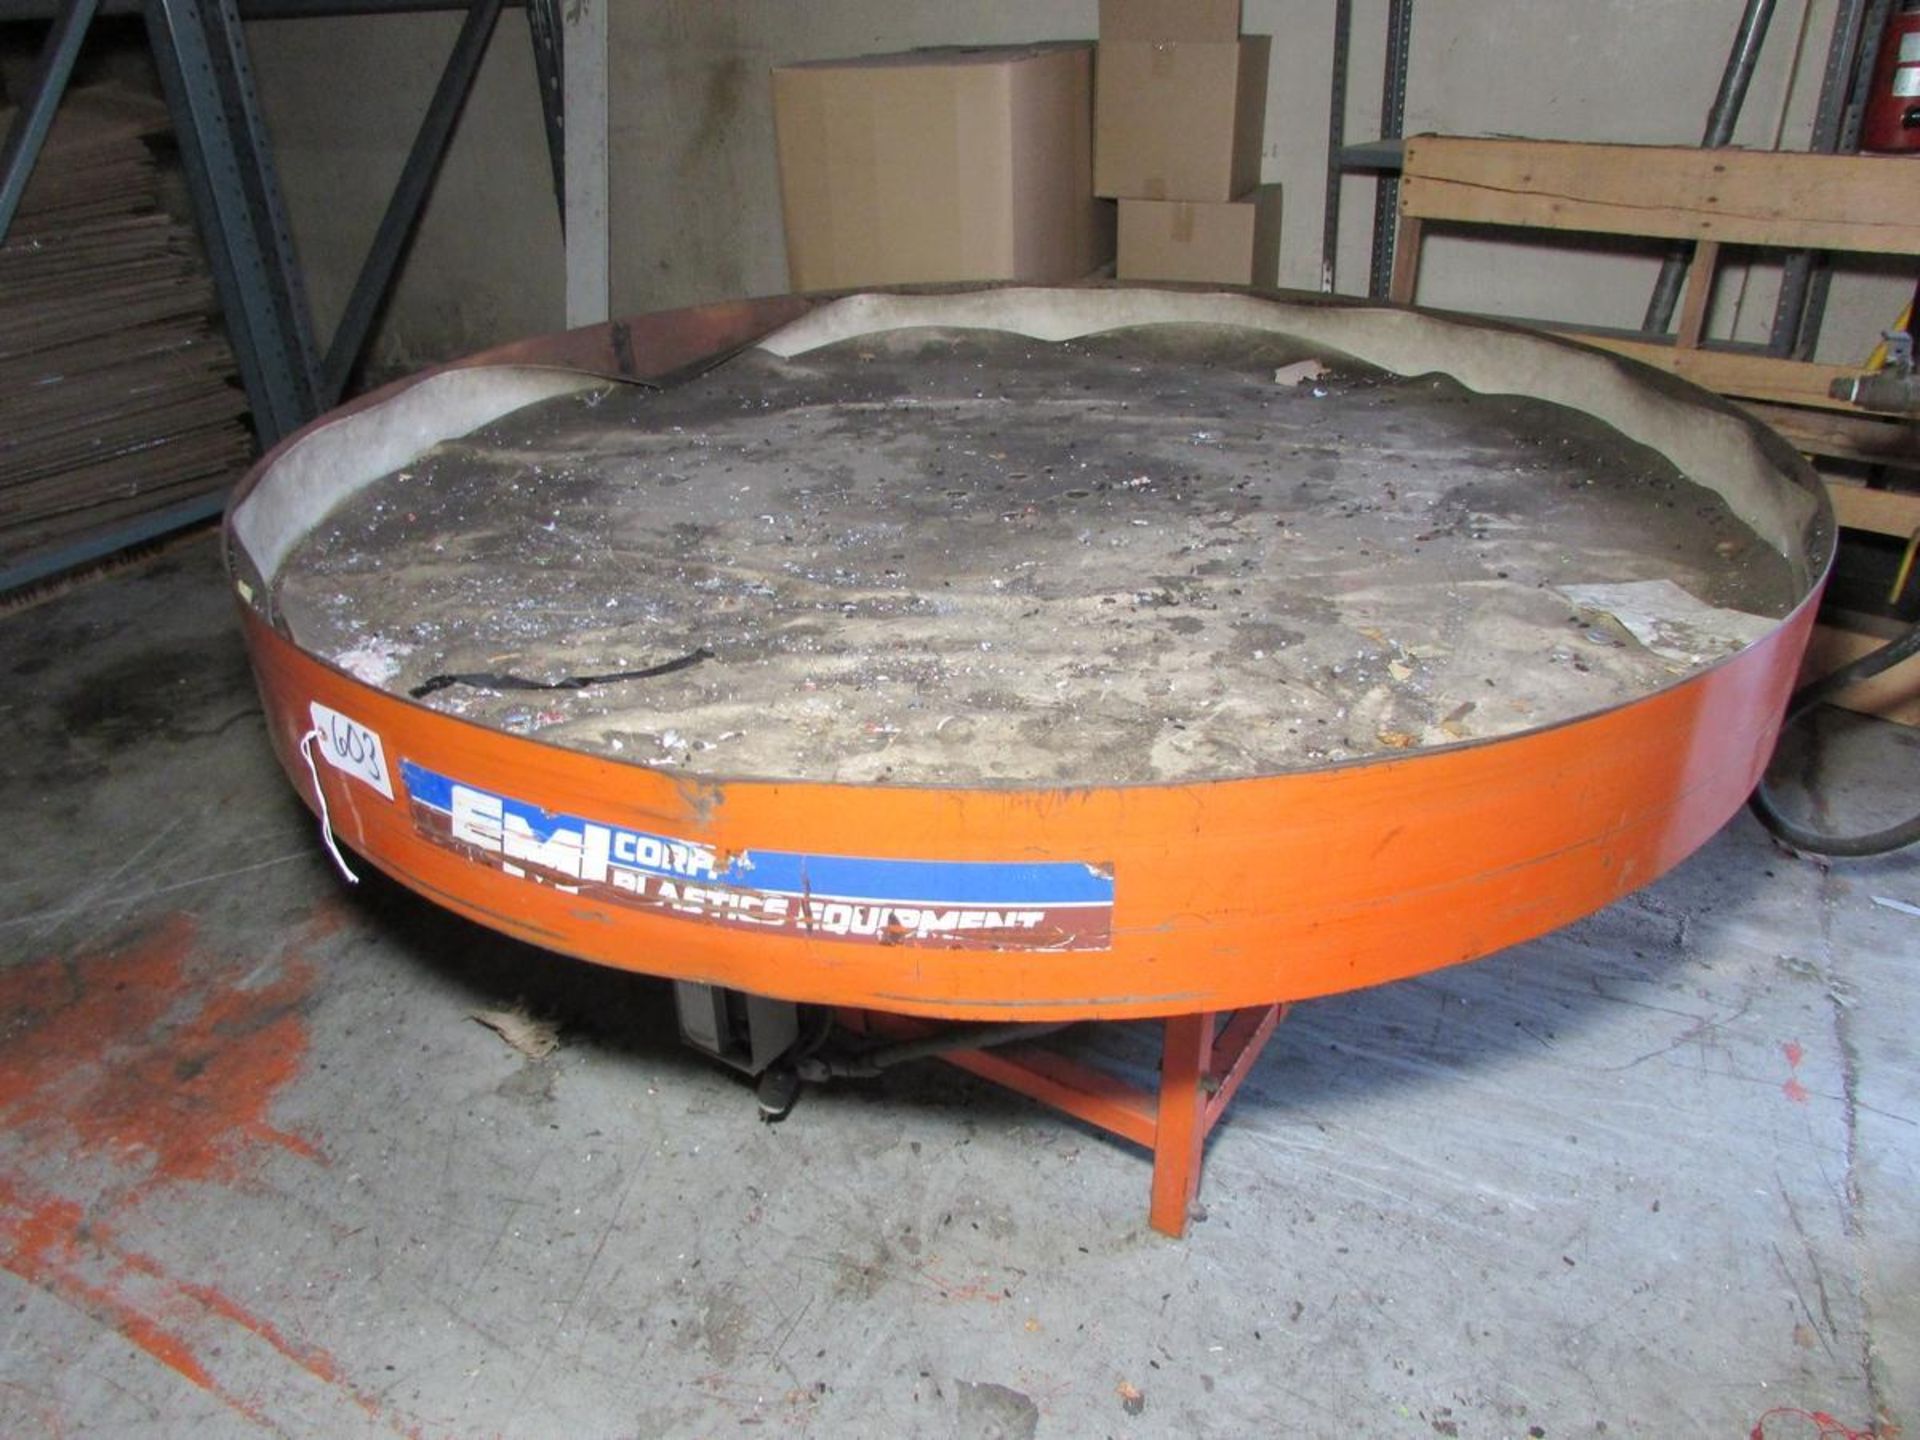 EMI CORP. 72" ROTARY PARTS ACCUMULATION TABLE